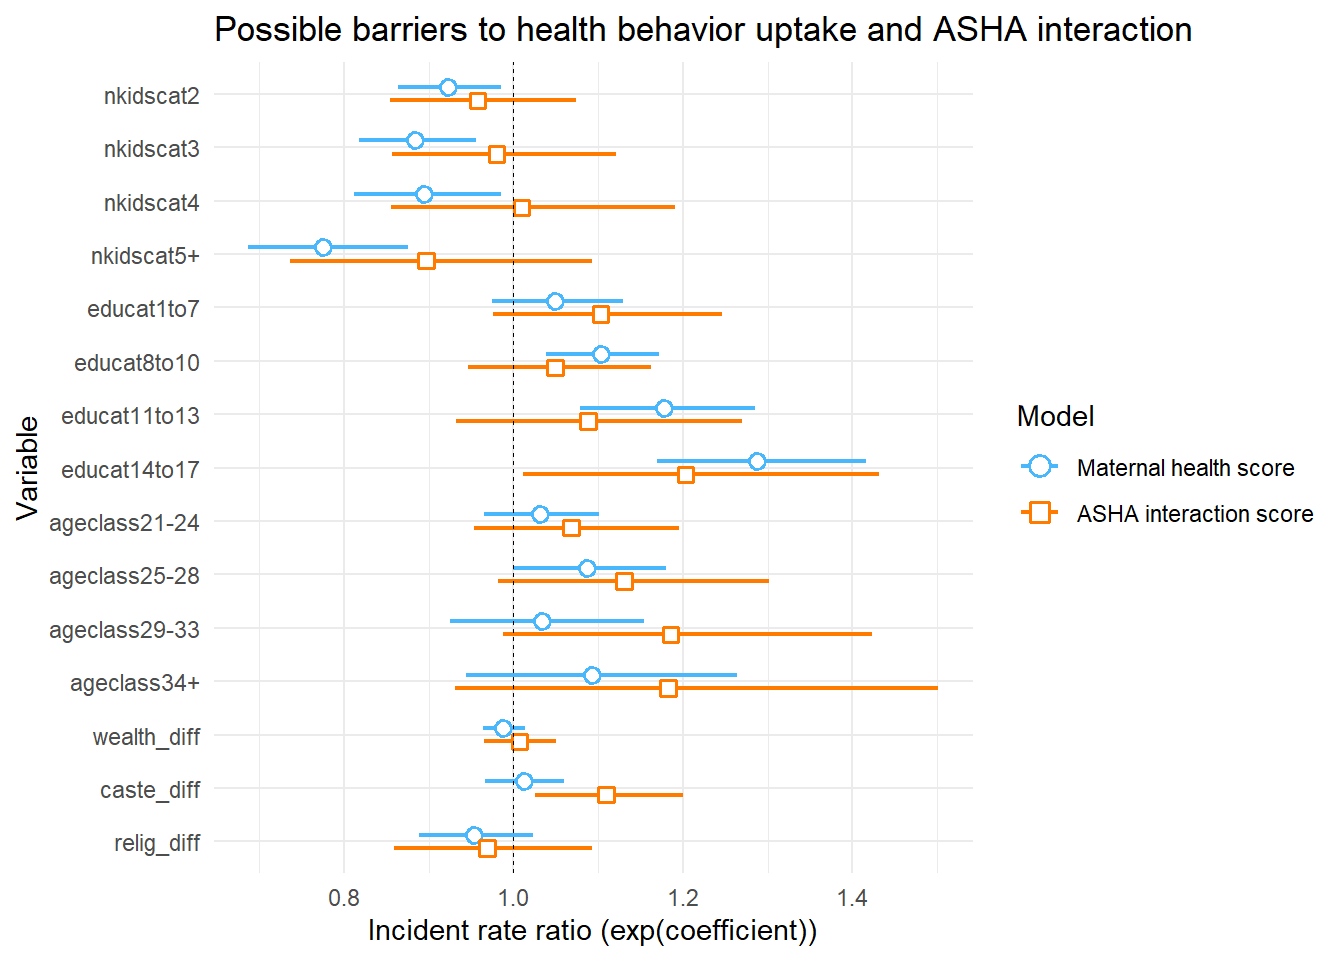 Assessing variation in ASHA interaction and uptake of health behaviors among Mothers, as a function of parity, fertility, education, and three measures of ASHA-Beneficiary difference: wealth, caste, and religion. Plot shows Incident Rate Ratios (similar to Odds Ratios) from a negative binomial generalized linear model. Health score is the sum of recommended behaviors adopted and ASHA interaction score is a sum of all ASHA interactions and mentions. Each model has the same predictor variables and differ only in the response variable.